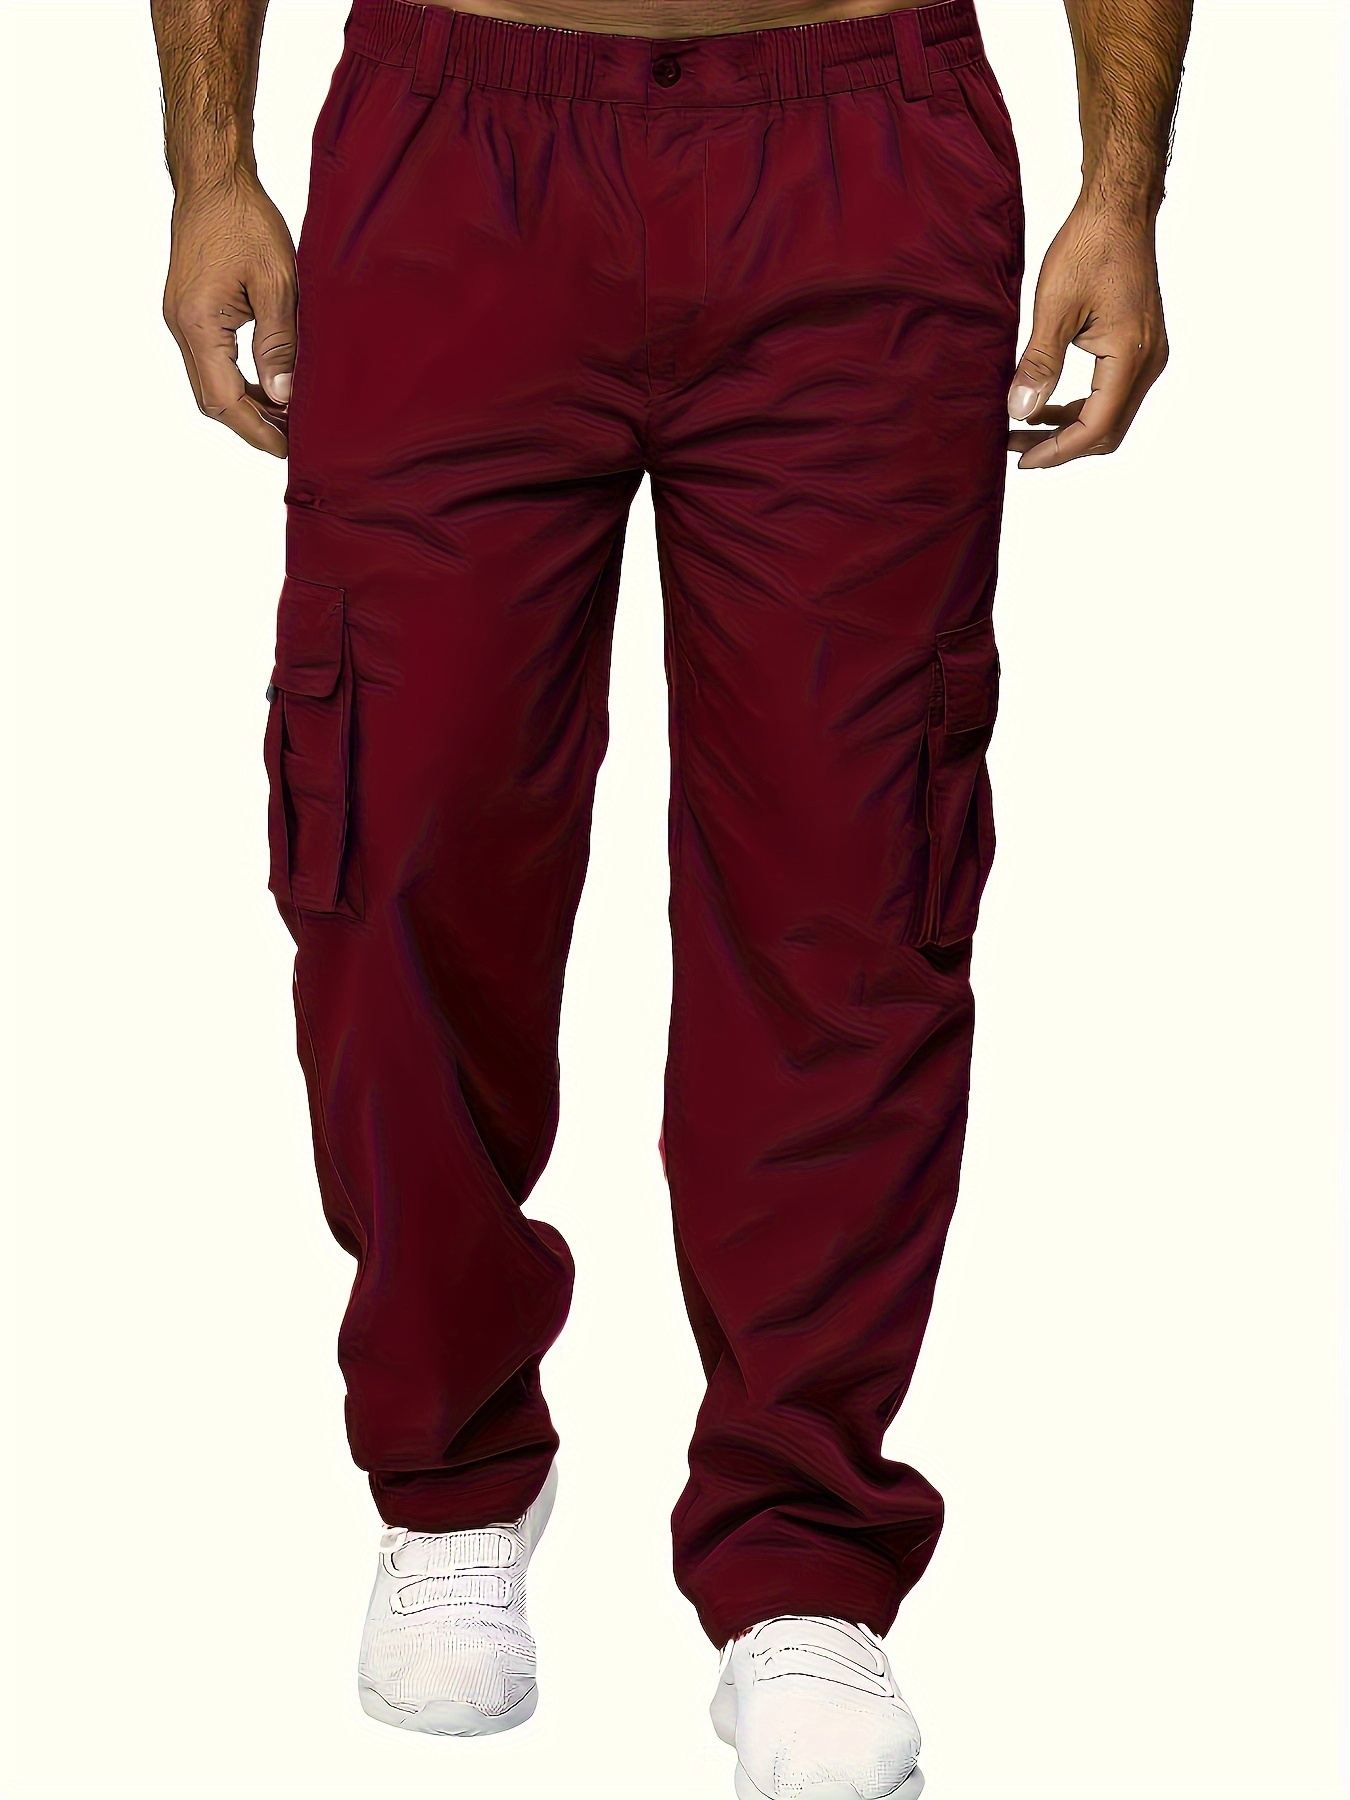 Cargo Pants for Men Relaxed Fit with Pockets Straight Leg Cargo